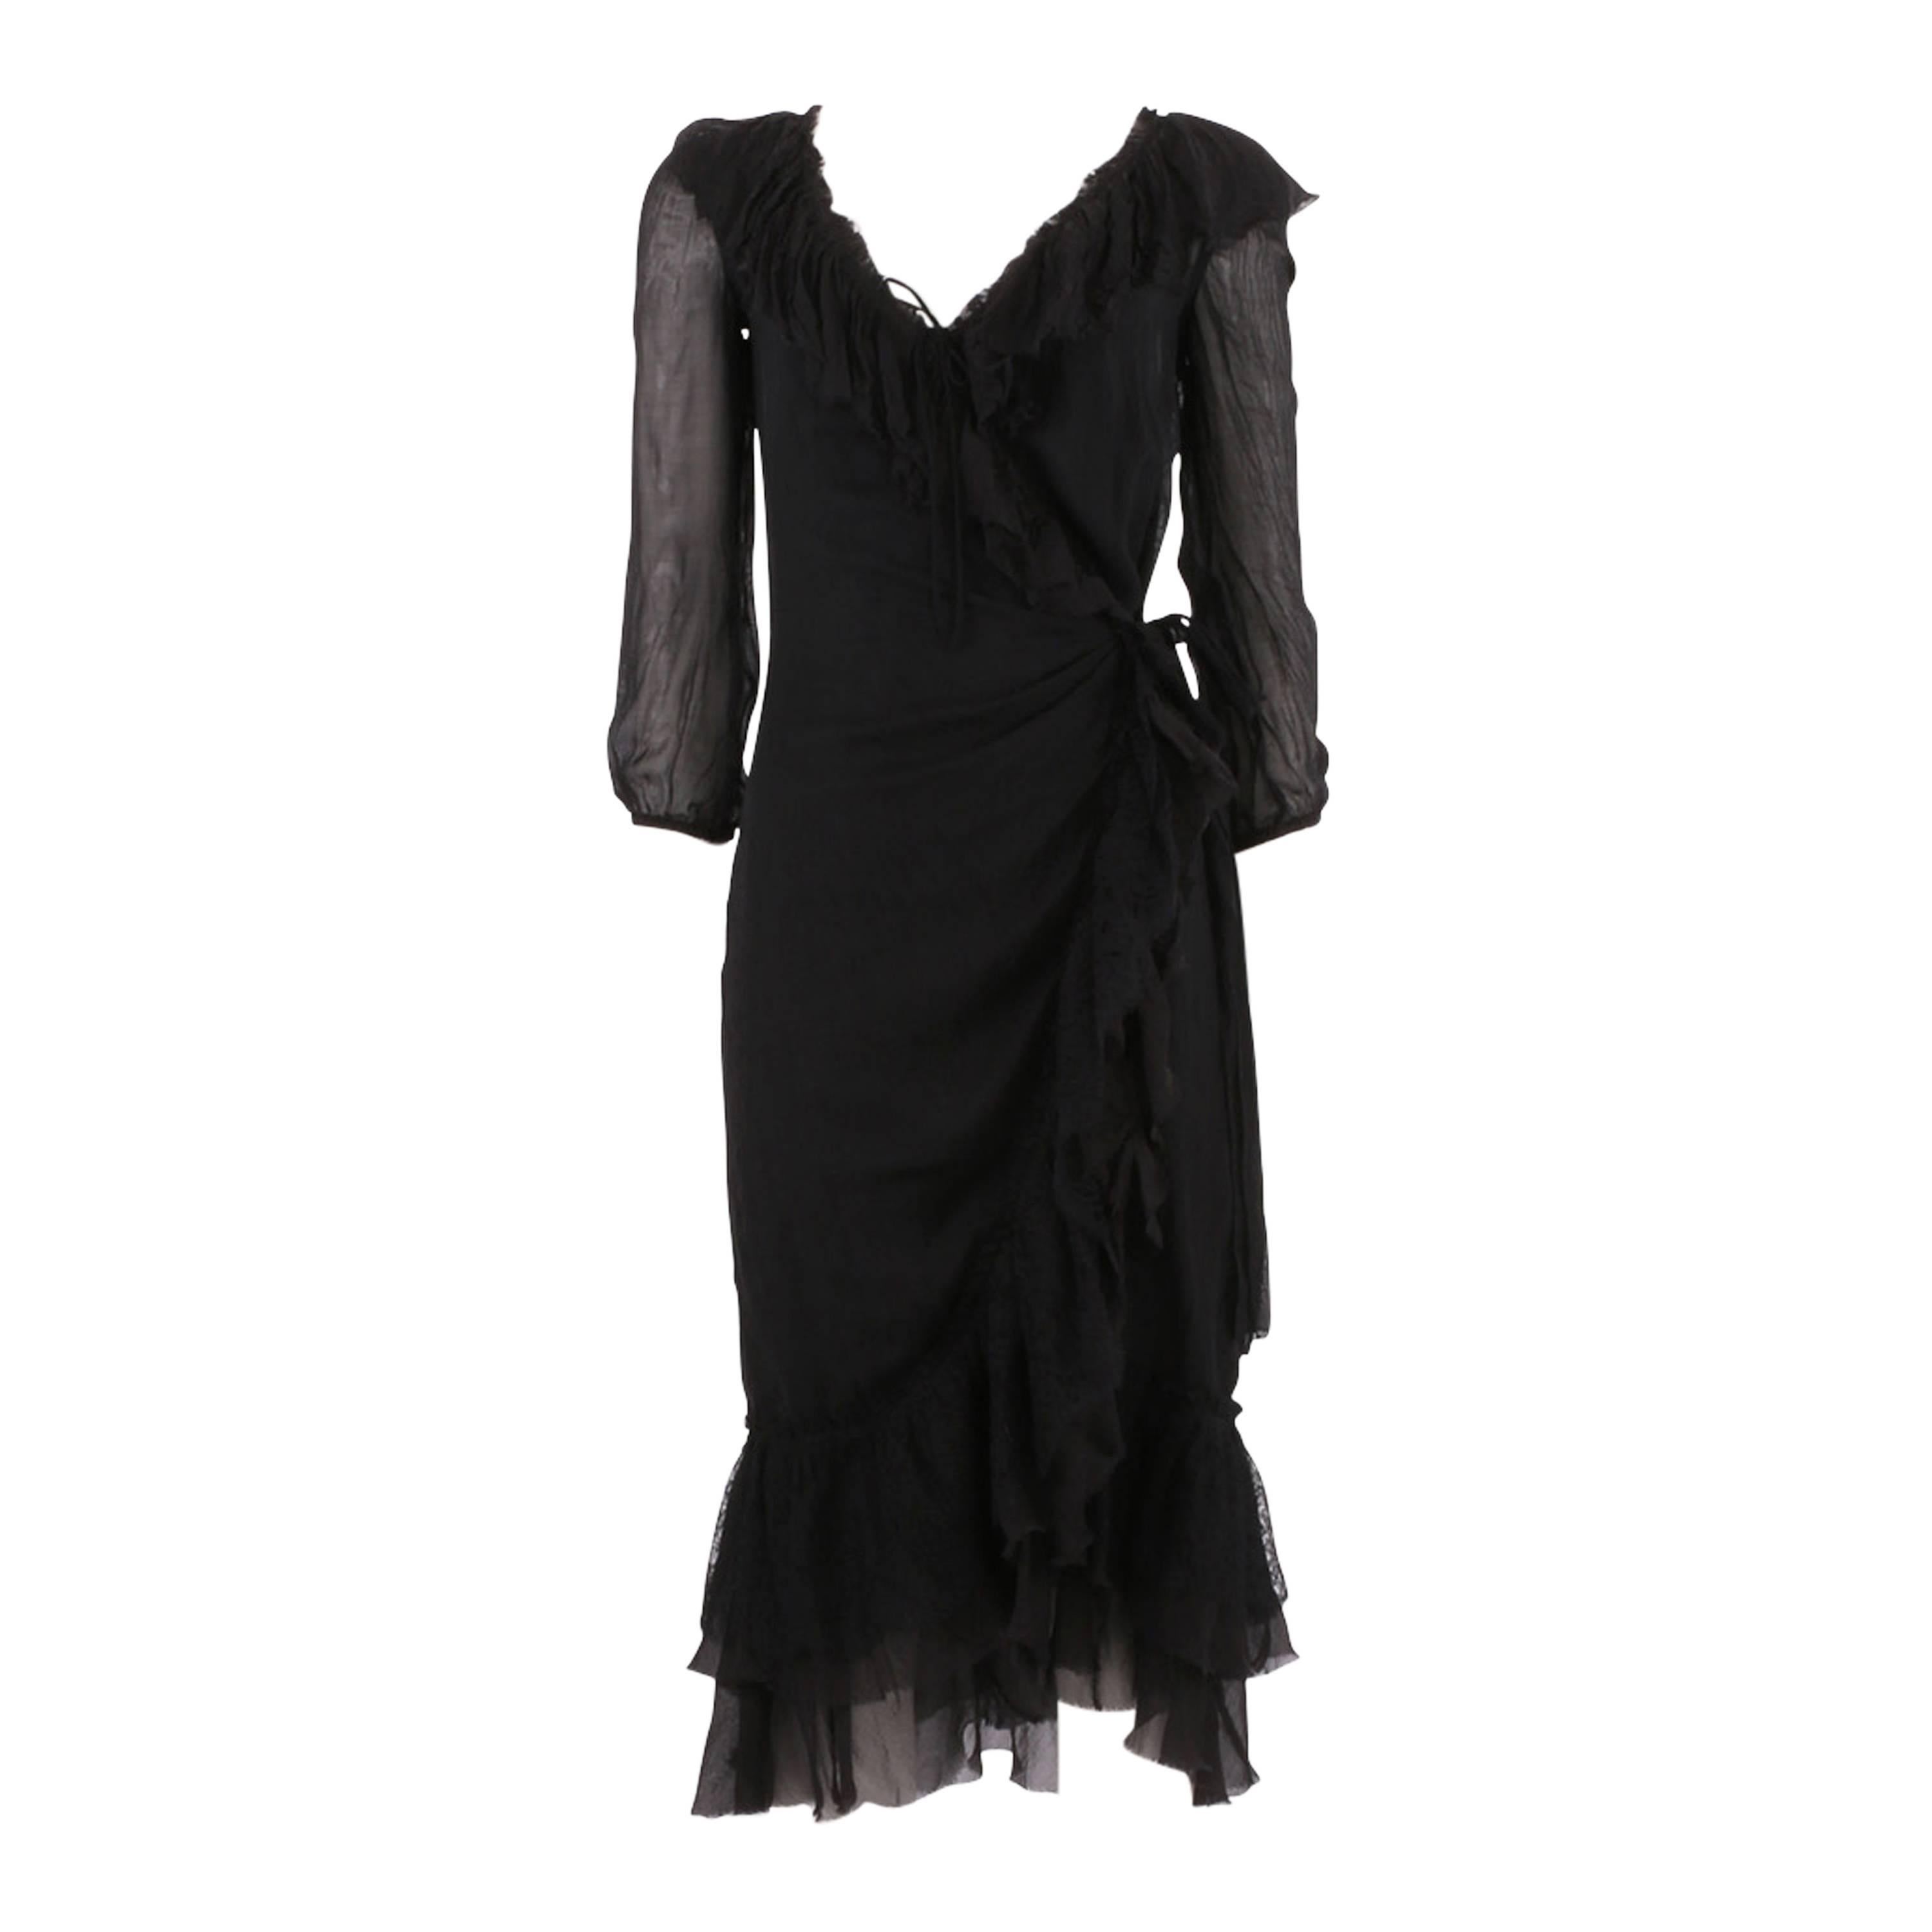 Prada Black Silk Overlay Dress with Lace For Sale